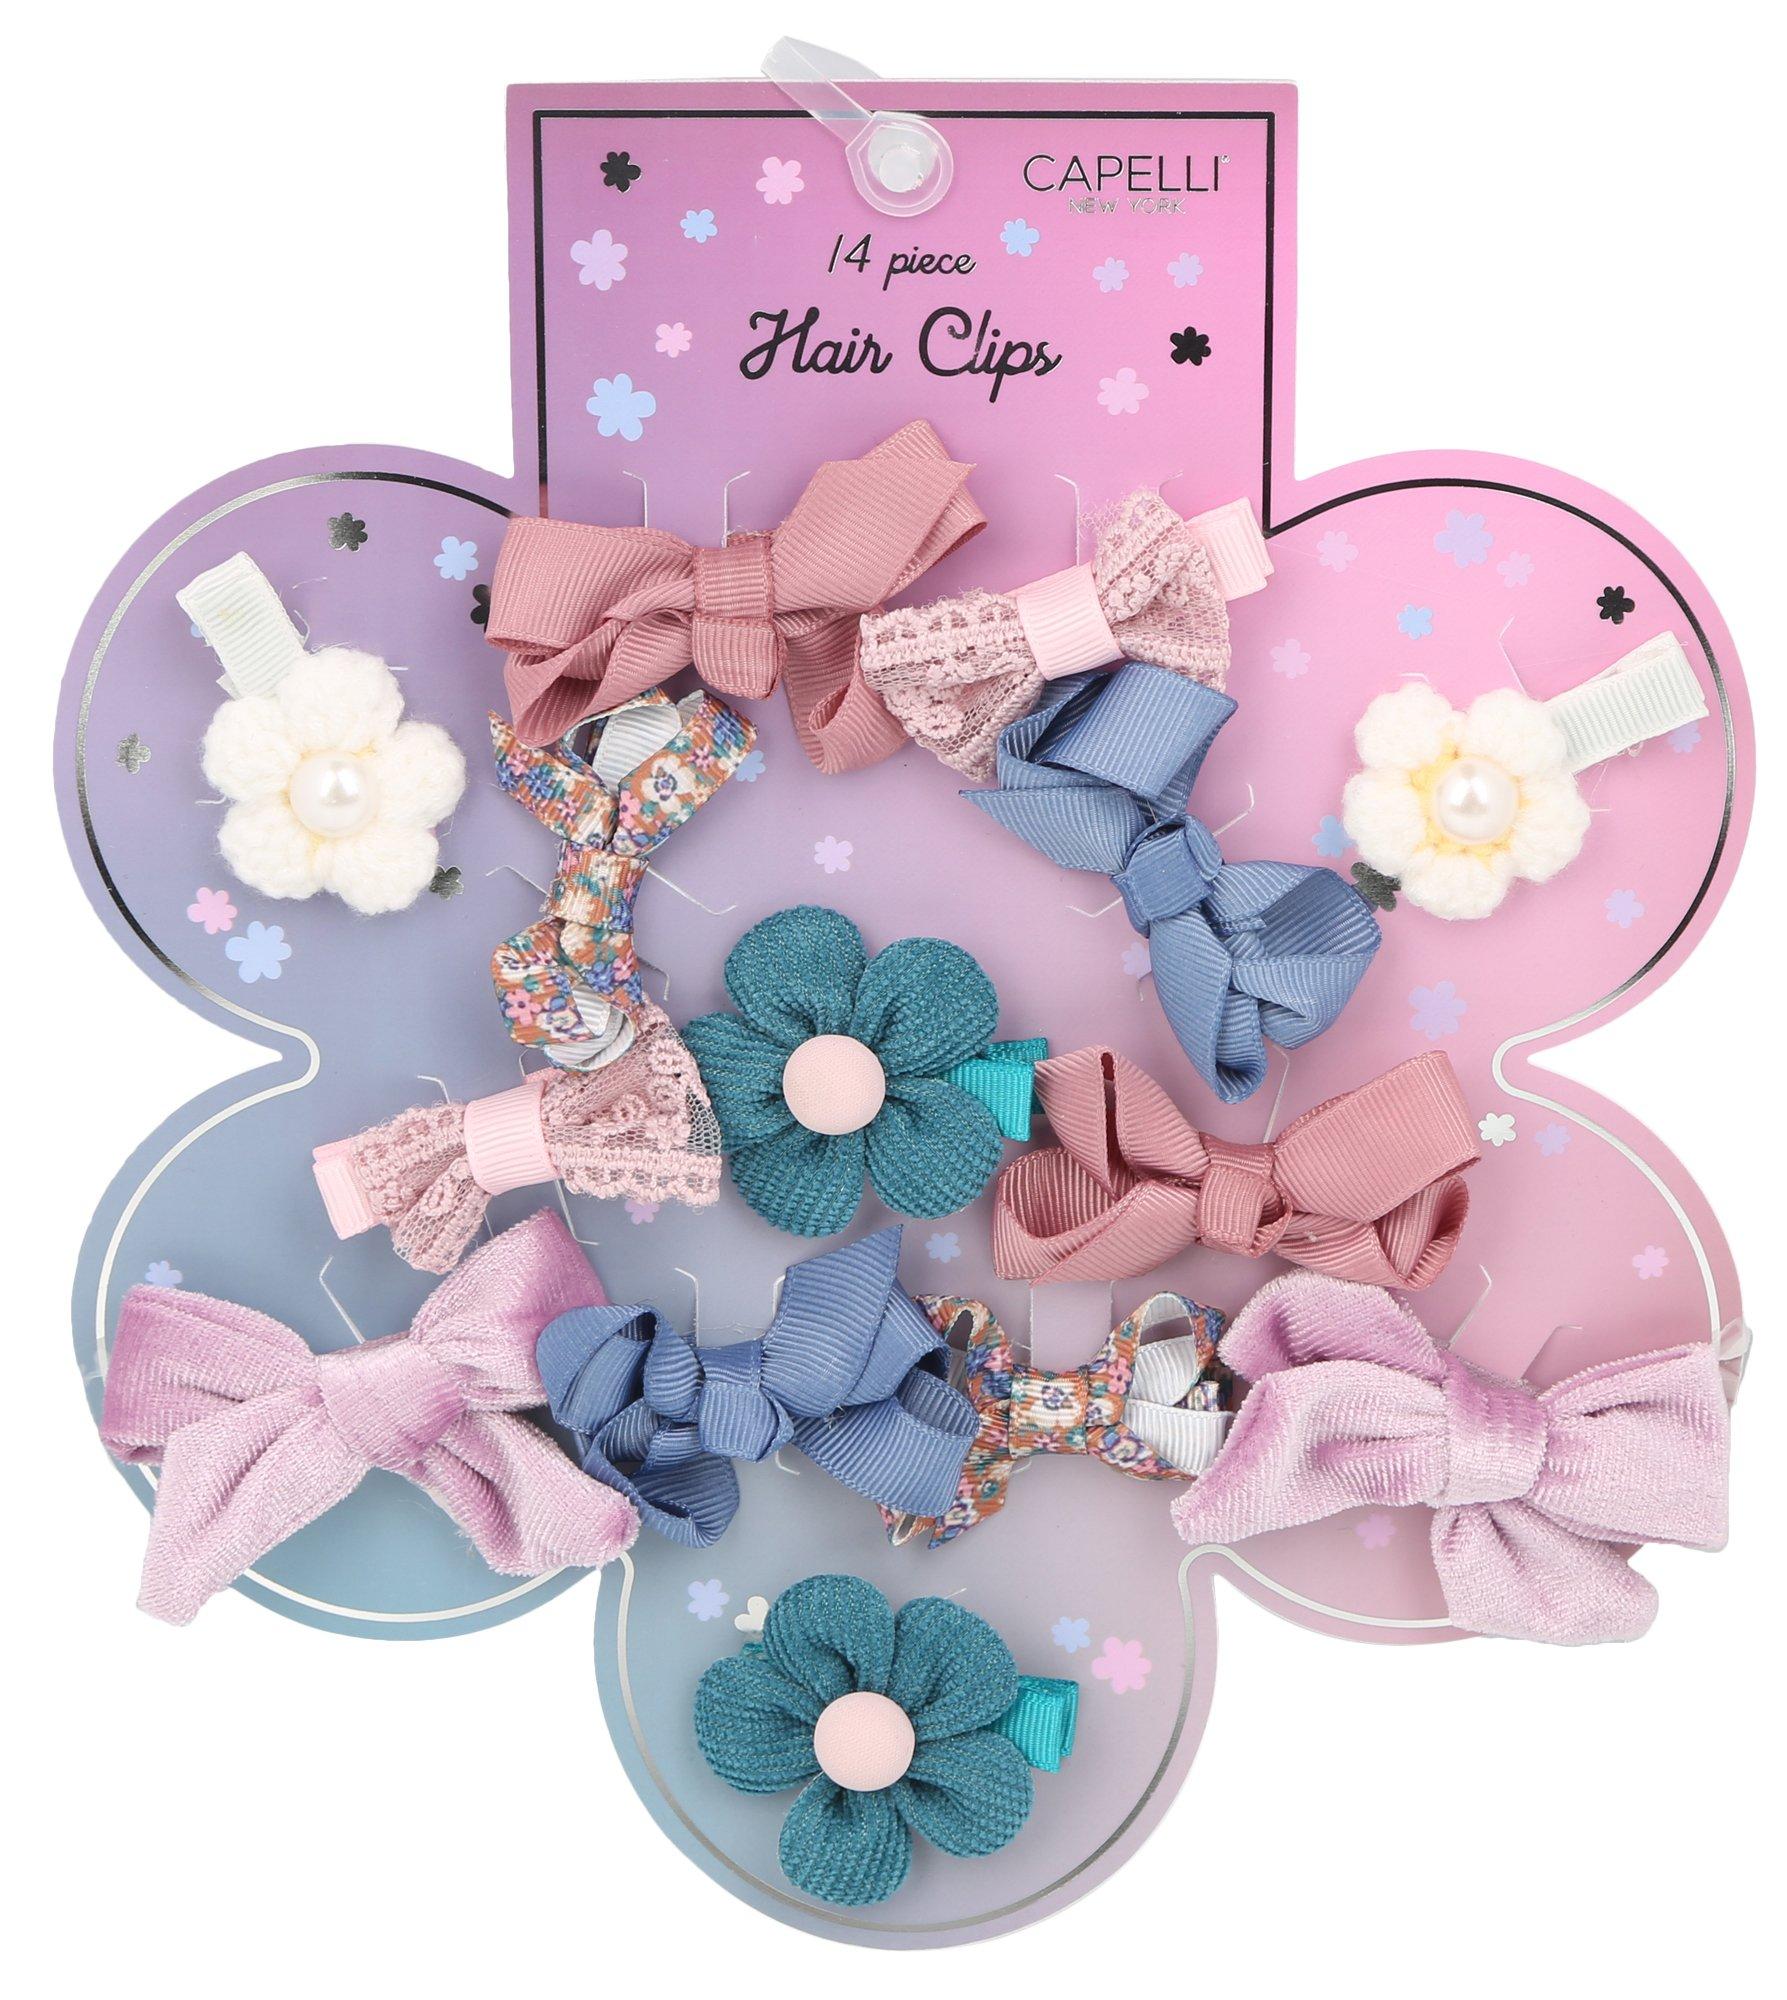 Capelli NY Girls 14pk. Flowers And Bows Collection